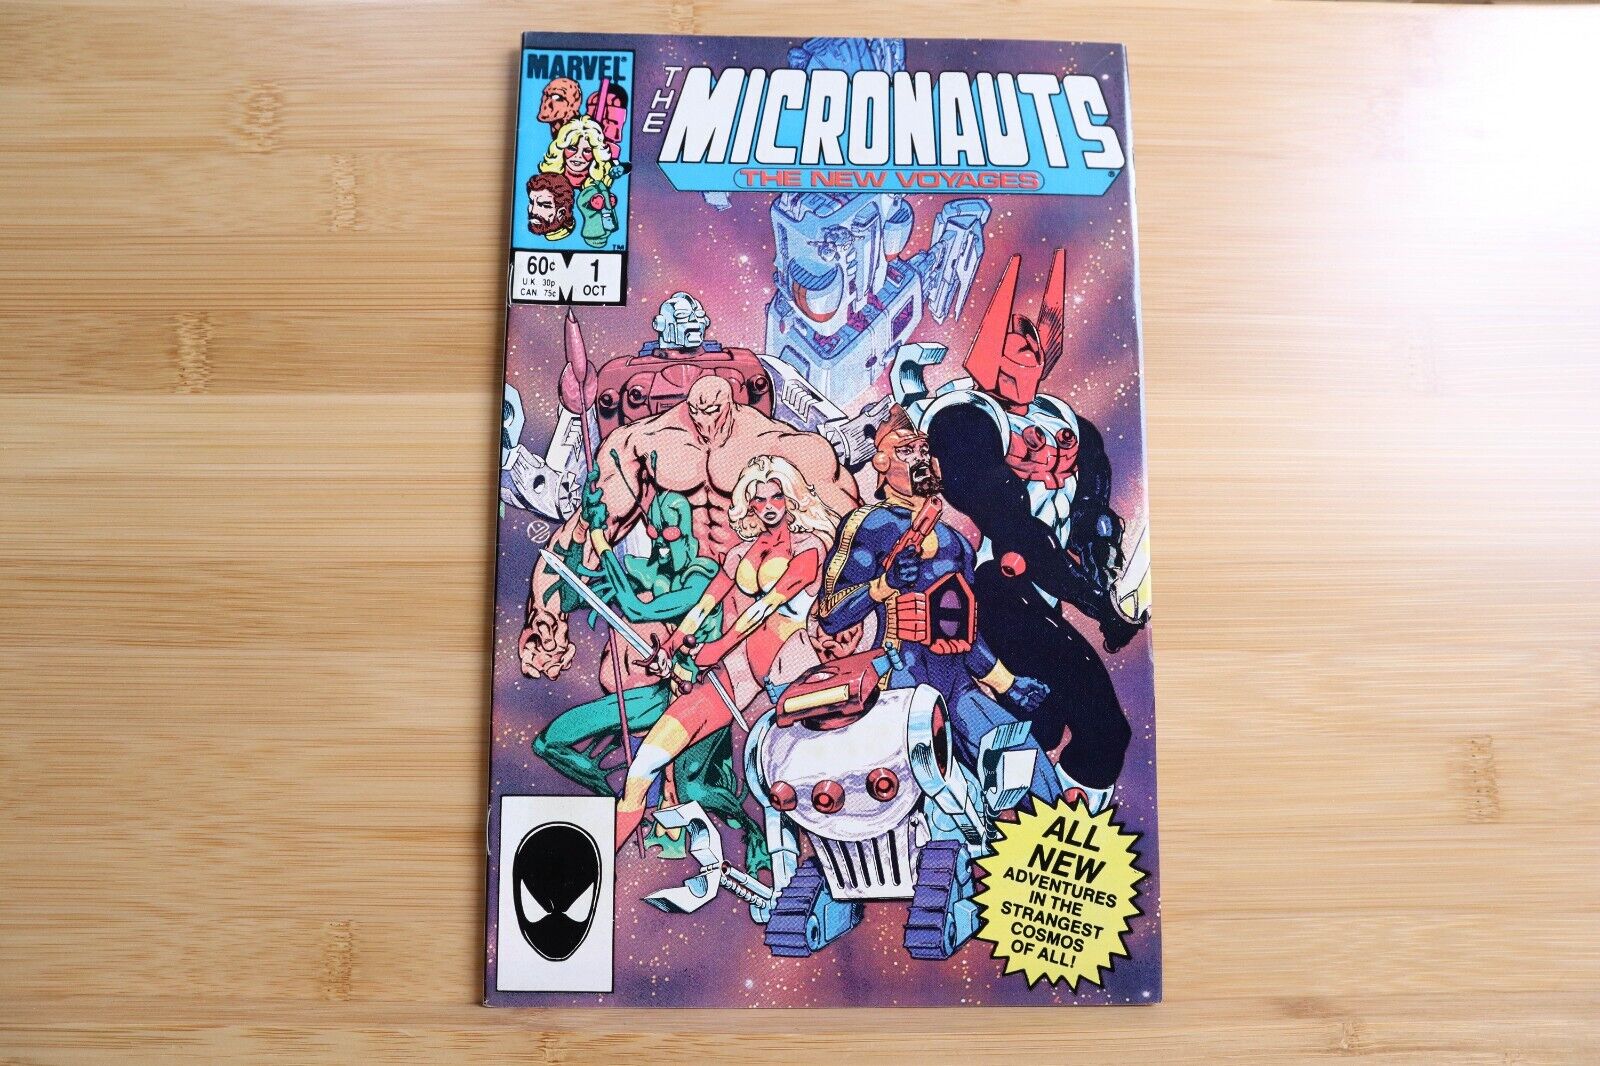 The Micronauts New Voyages #1 Comic Book Direct Comics Marvel VF/NM - 1984